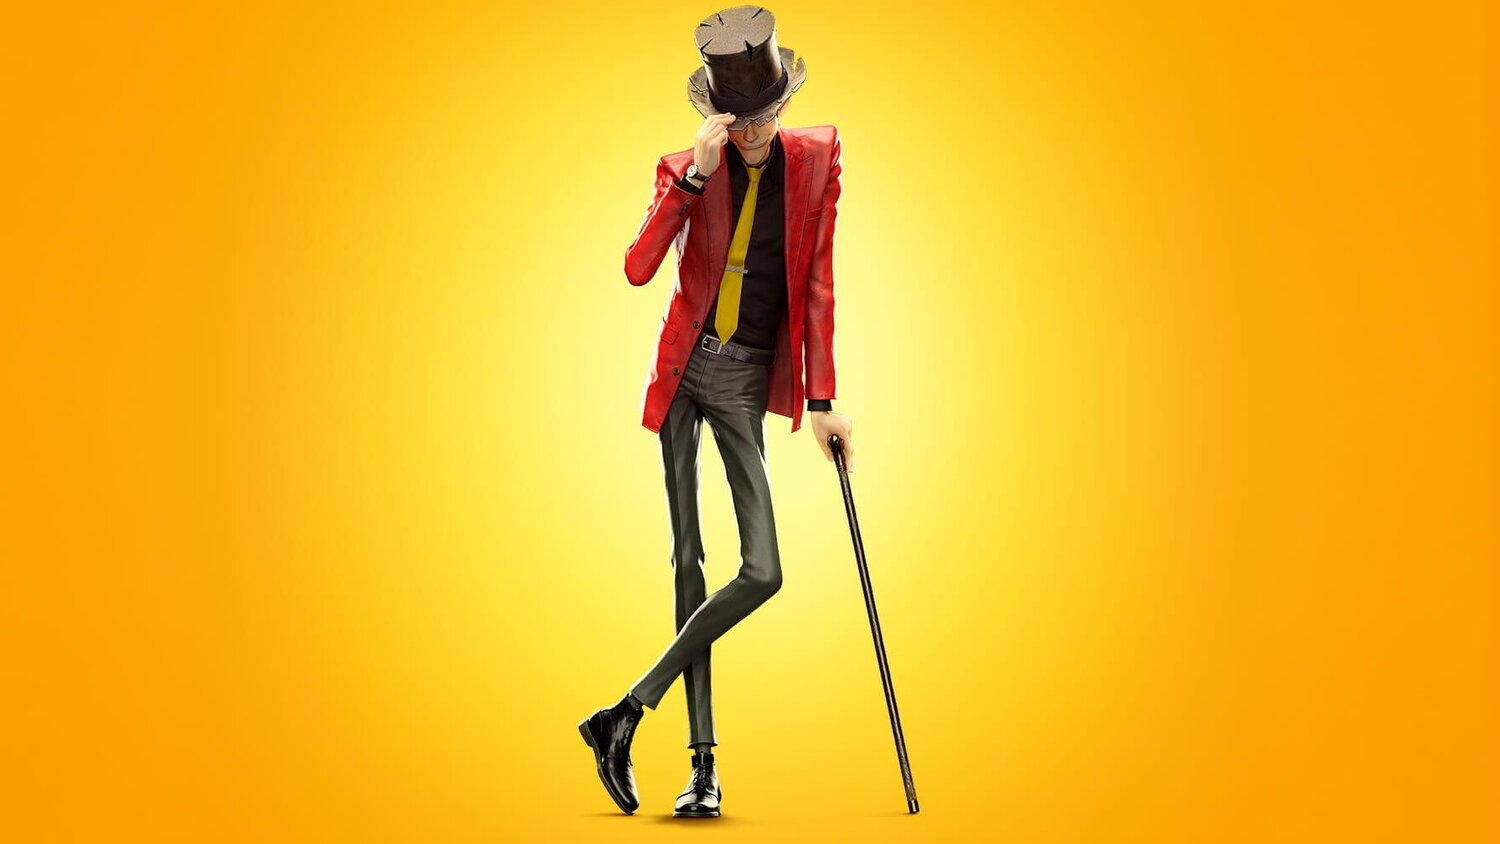 A closer look at the Lupin III: The First MSP figurine! 